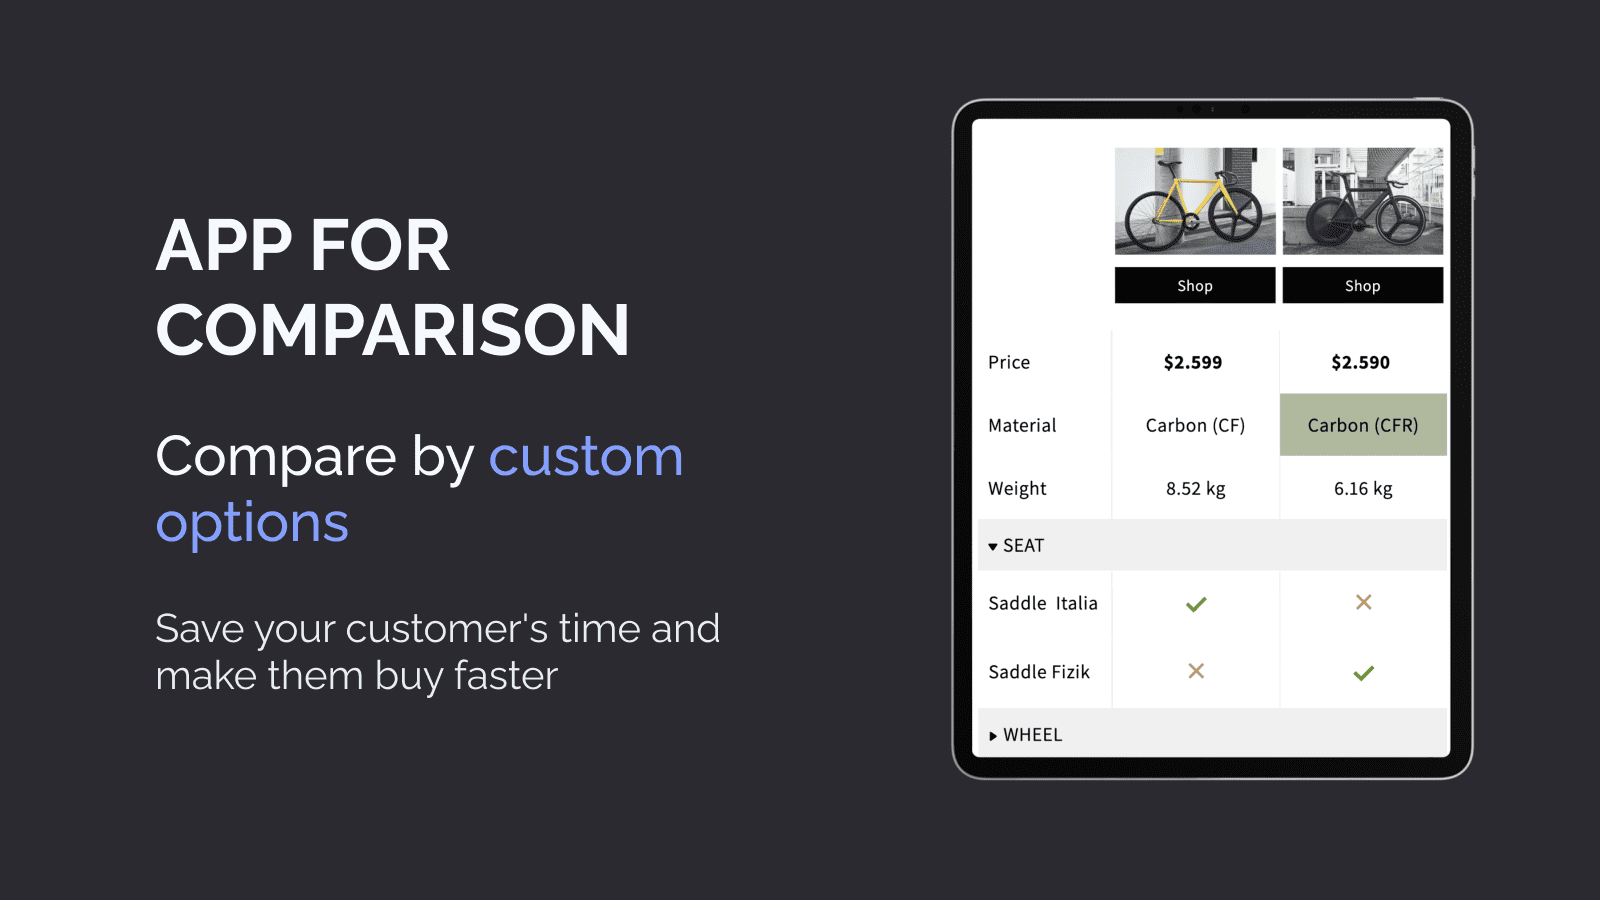 Compare by custom options